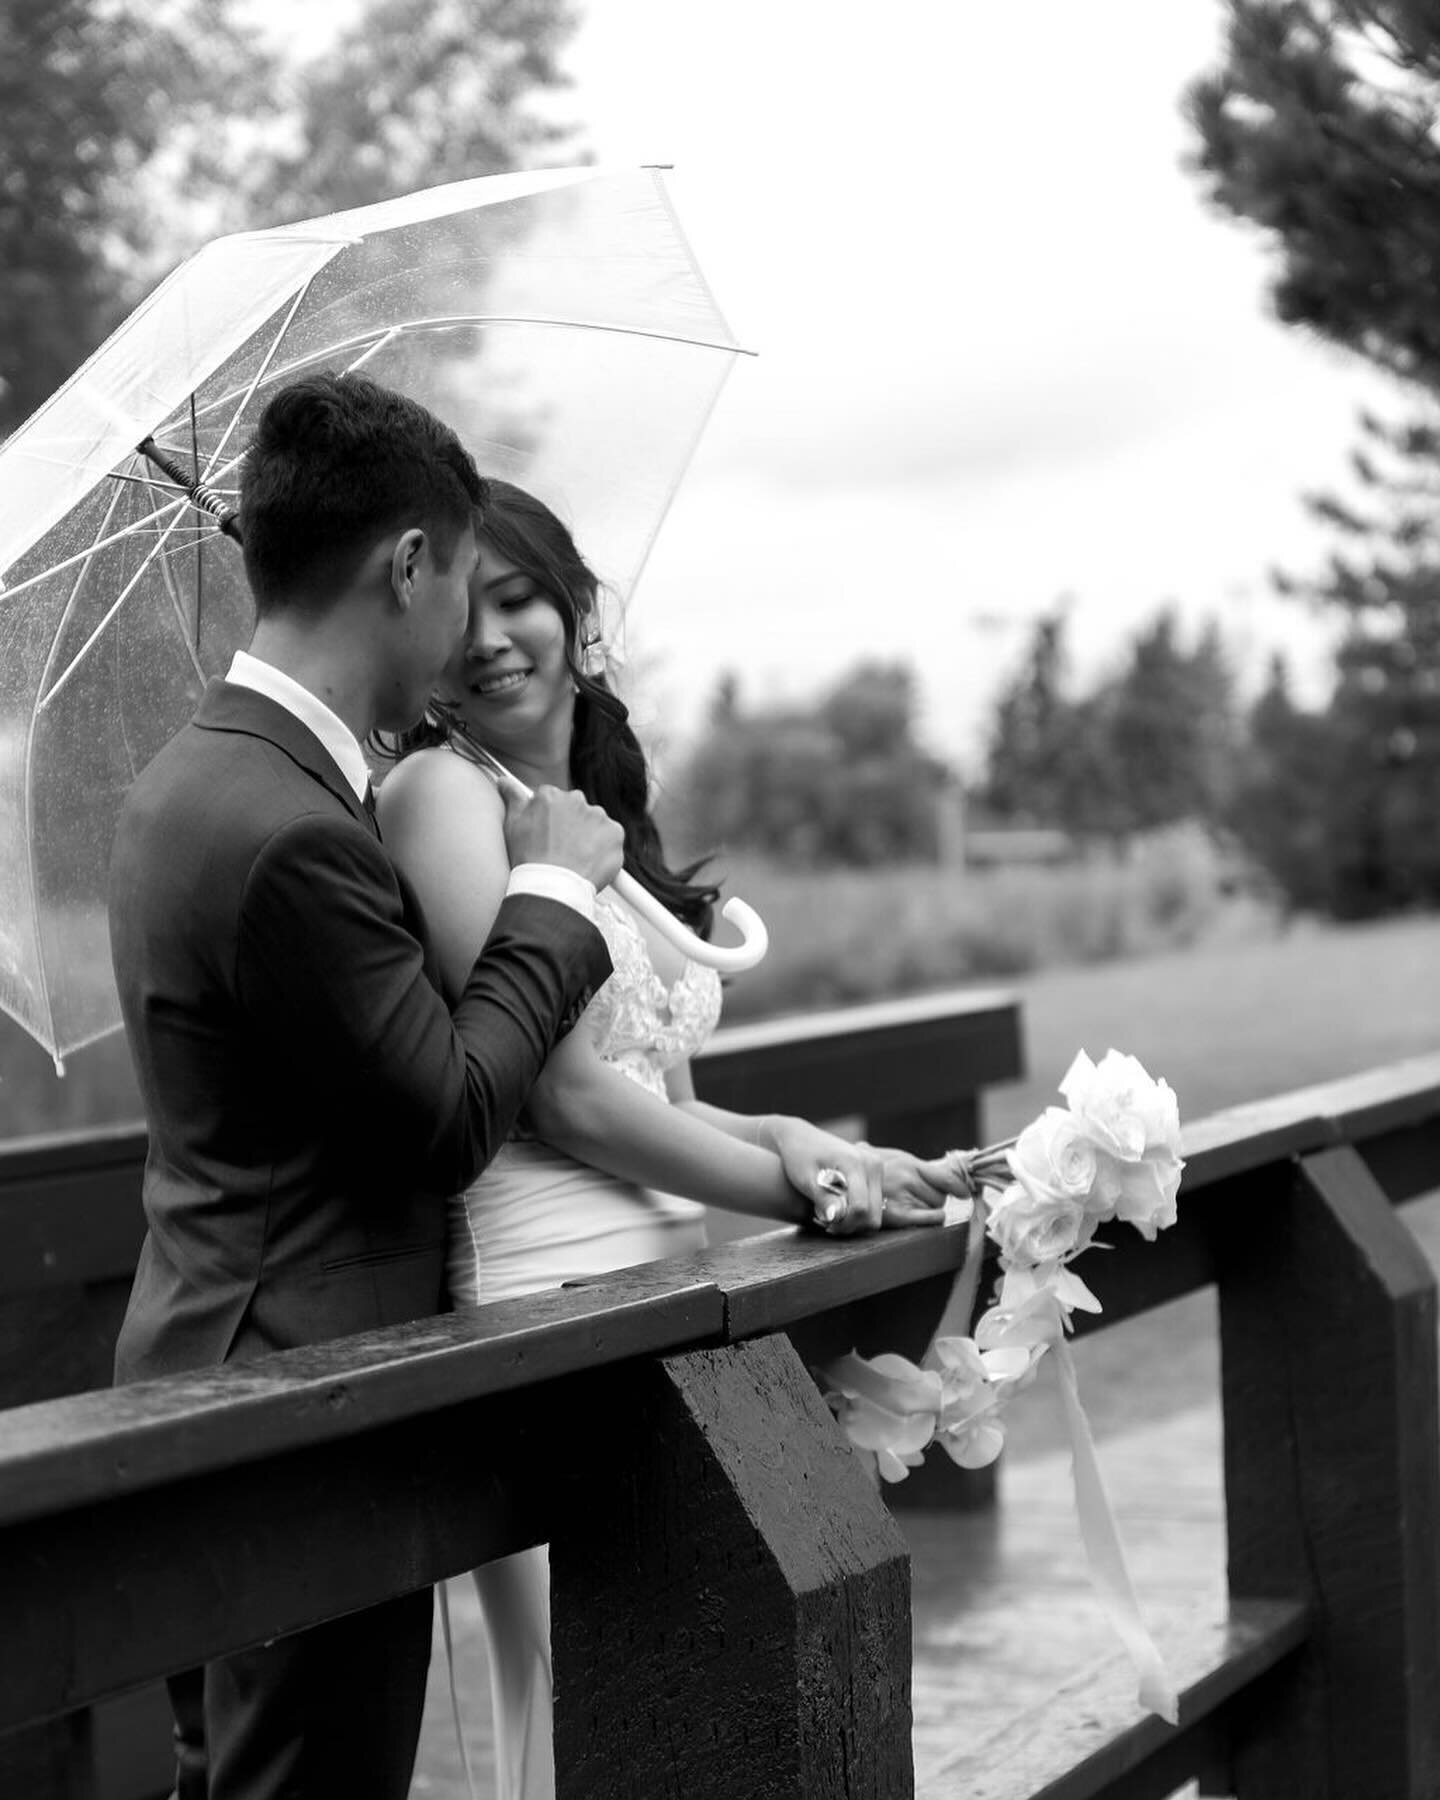 .
.
A little rain could not dampen the love J&amp;K shared. Underneath the clear umbrellas, love sparkled like raindrops, adding an extra touch of romance to every portrait captured. With all the beautiful florals grown by father of the bride, every 